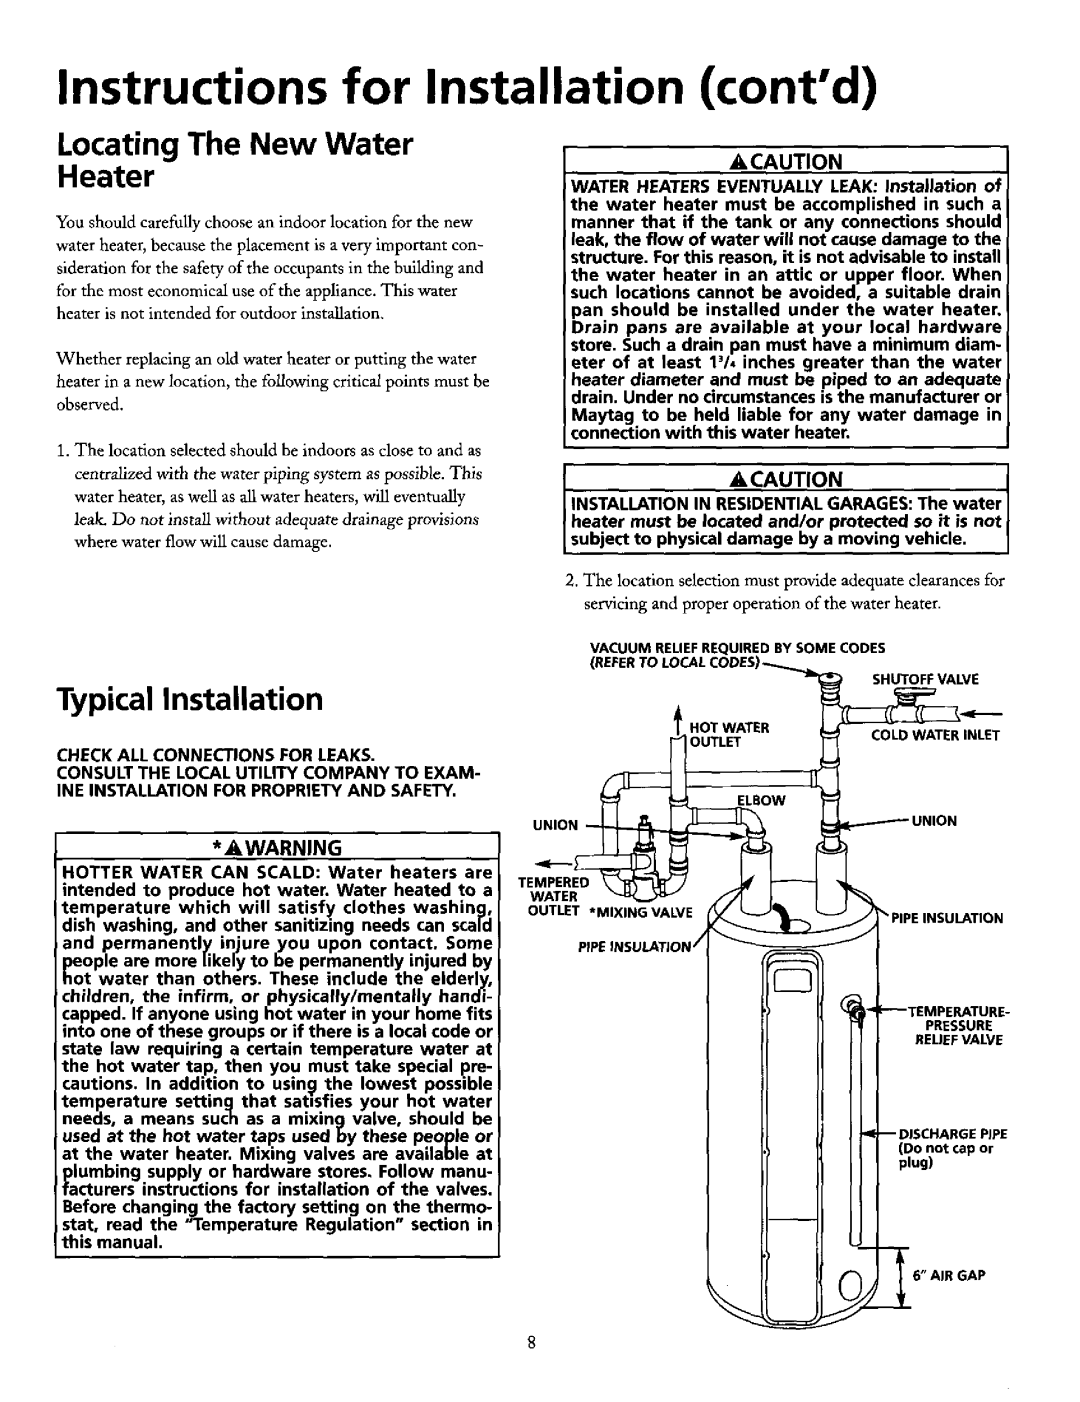 Maytag HE31250T, HE31250S, HE31282T, HE31240S Instructions for Installation contd, Locating The New Water Heater, Acaution 